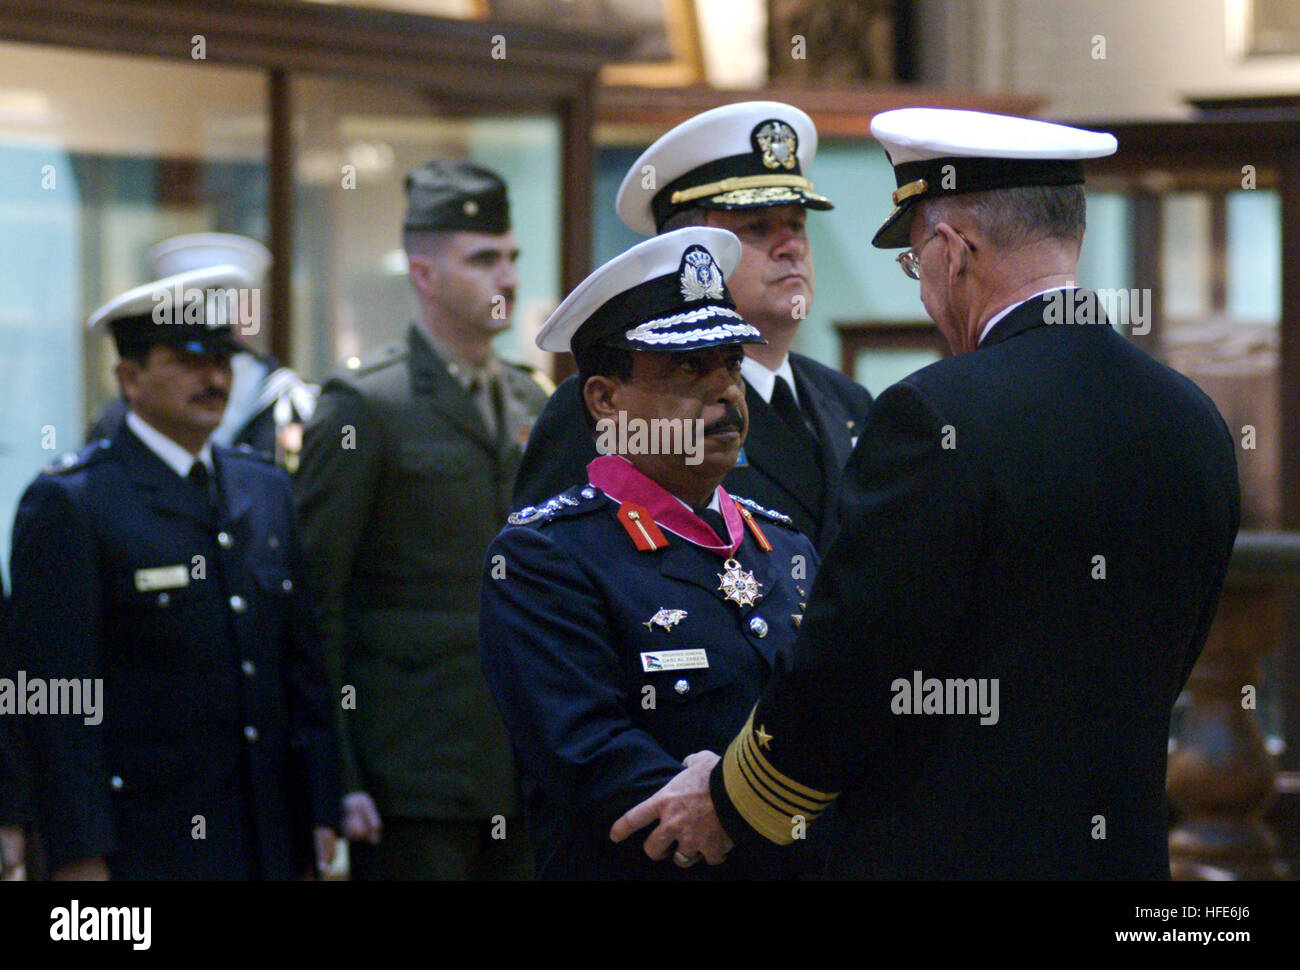 041207-N-2383B-023 Washington, D.C. (Dec. 7, 2004) - Brig. Gen. Dari Rajeb Al Zaben, Royal Jordanian Naval Force, is congratulated by Chief of Naval Operations (CNO) Adm. Vern Clark, after receiving the Legion of Merit. Brig. Gen. Al Zaben was recognized for his focused efforts to train Royal Jordanian Naval forces to enhance its terrorist intervention capabilities and the policing of Jordan's borders, resulting in stronger maritime security in the Red Sea. Brig. Gen. Al Zaben was given a full honors welcome ceremony recognizing his official visit to the United States. U.S. Navy photo by Chief Stock Photo